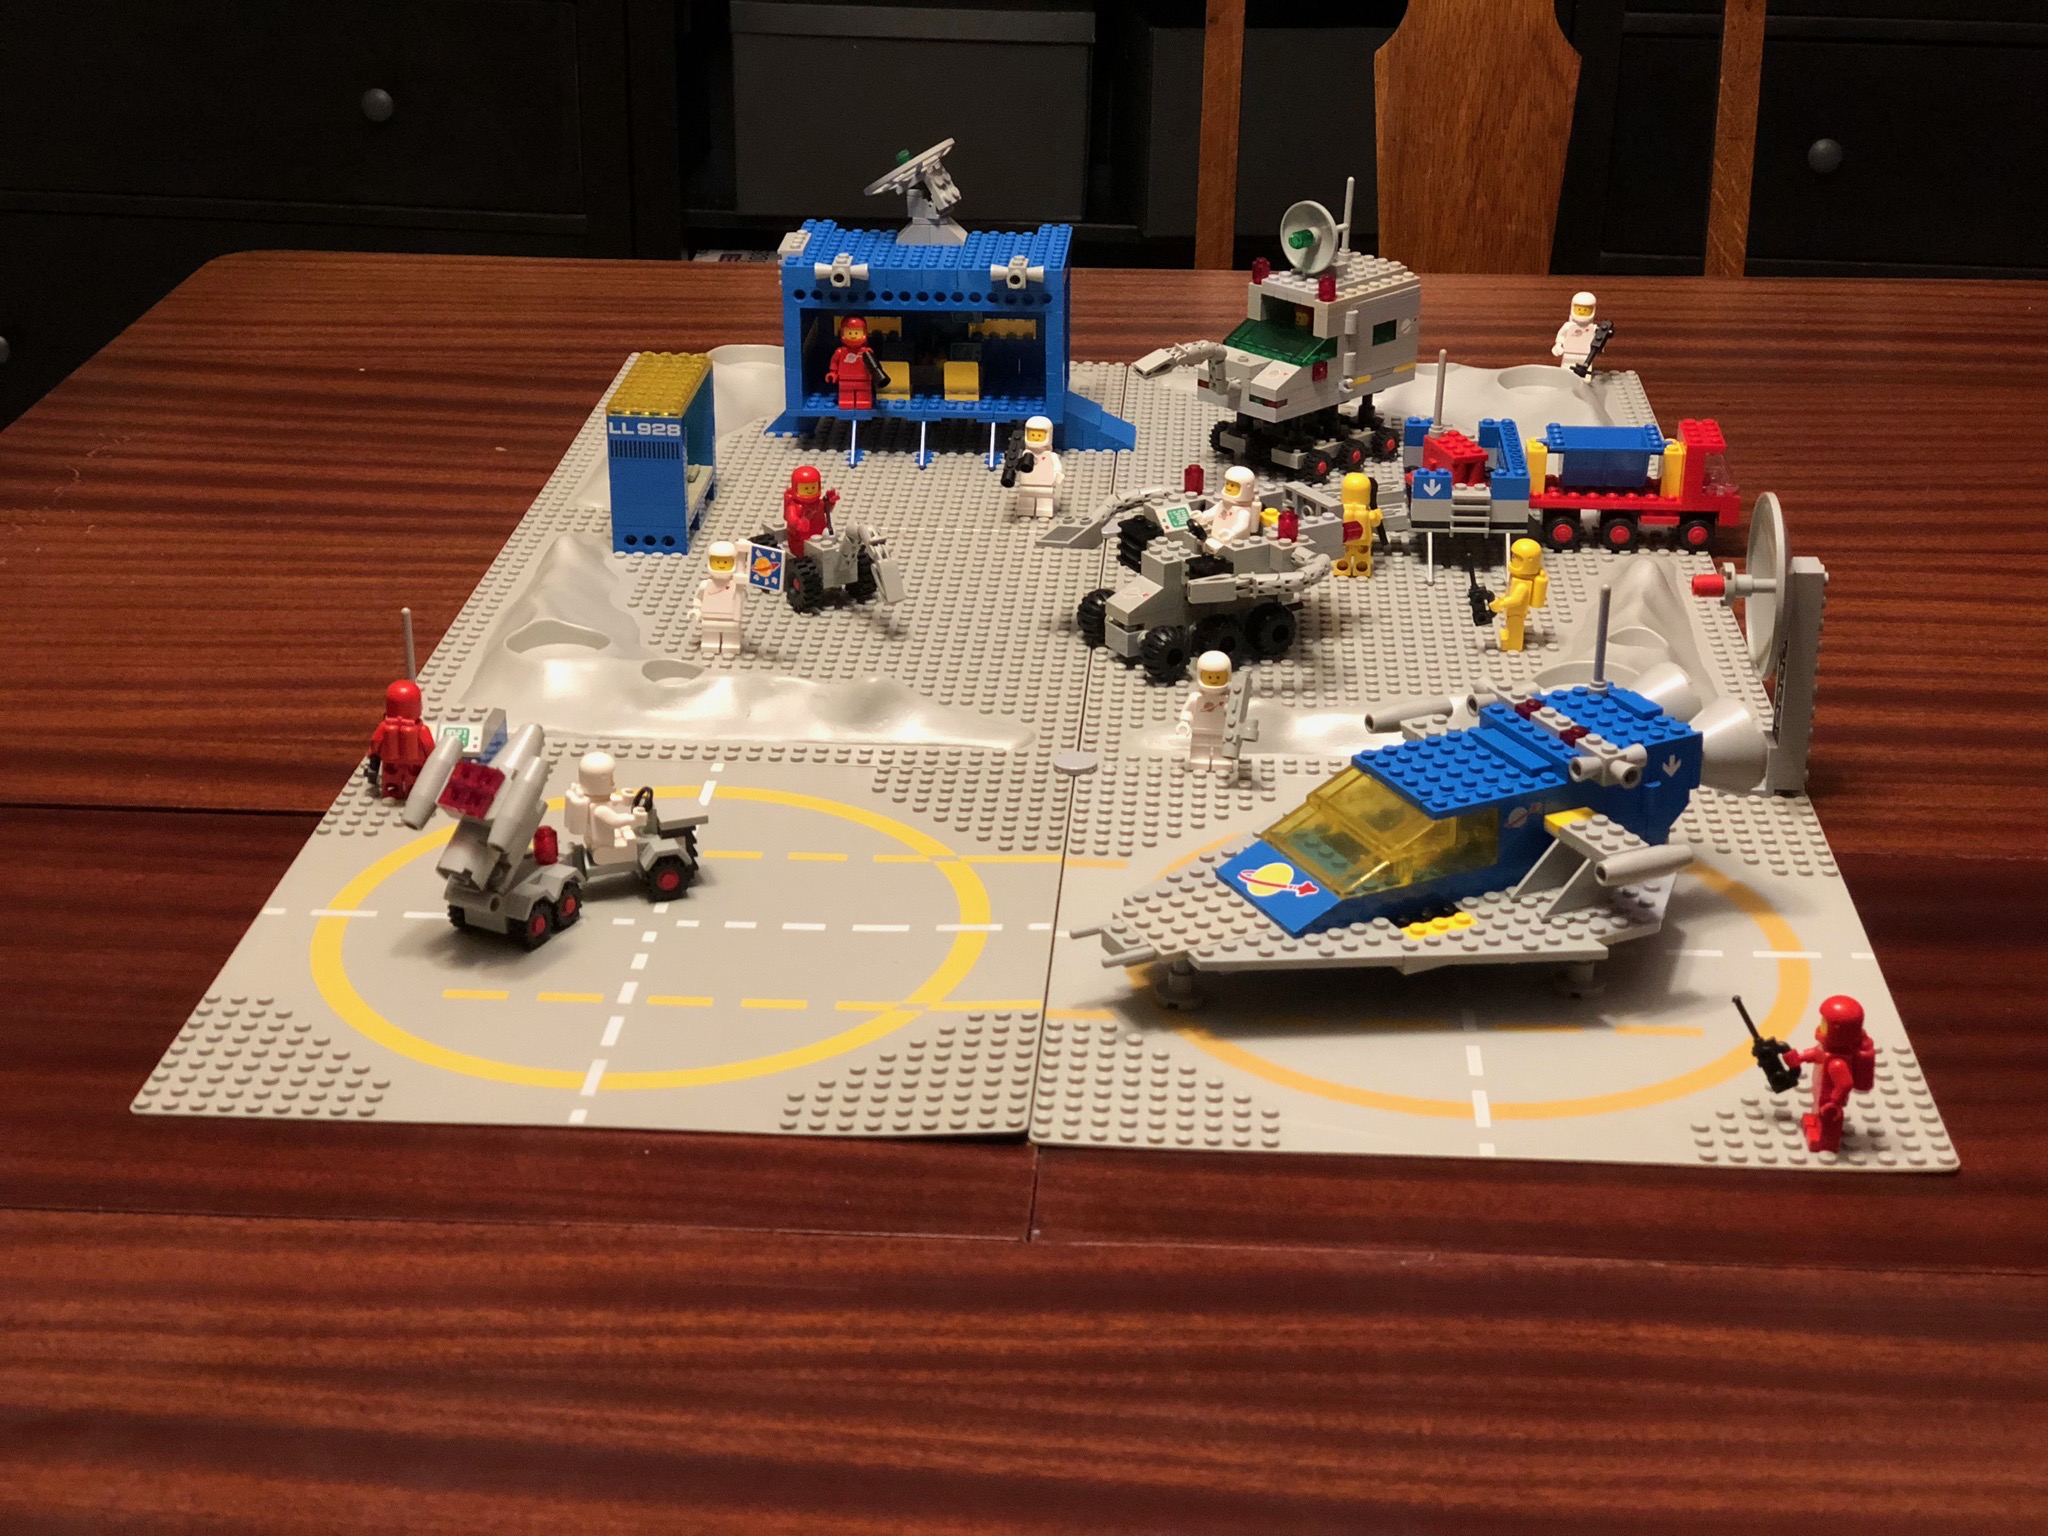 A collection of vintage space lego sets sitting on four grey lego boards, atop a dining table